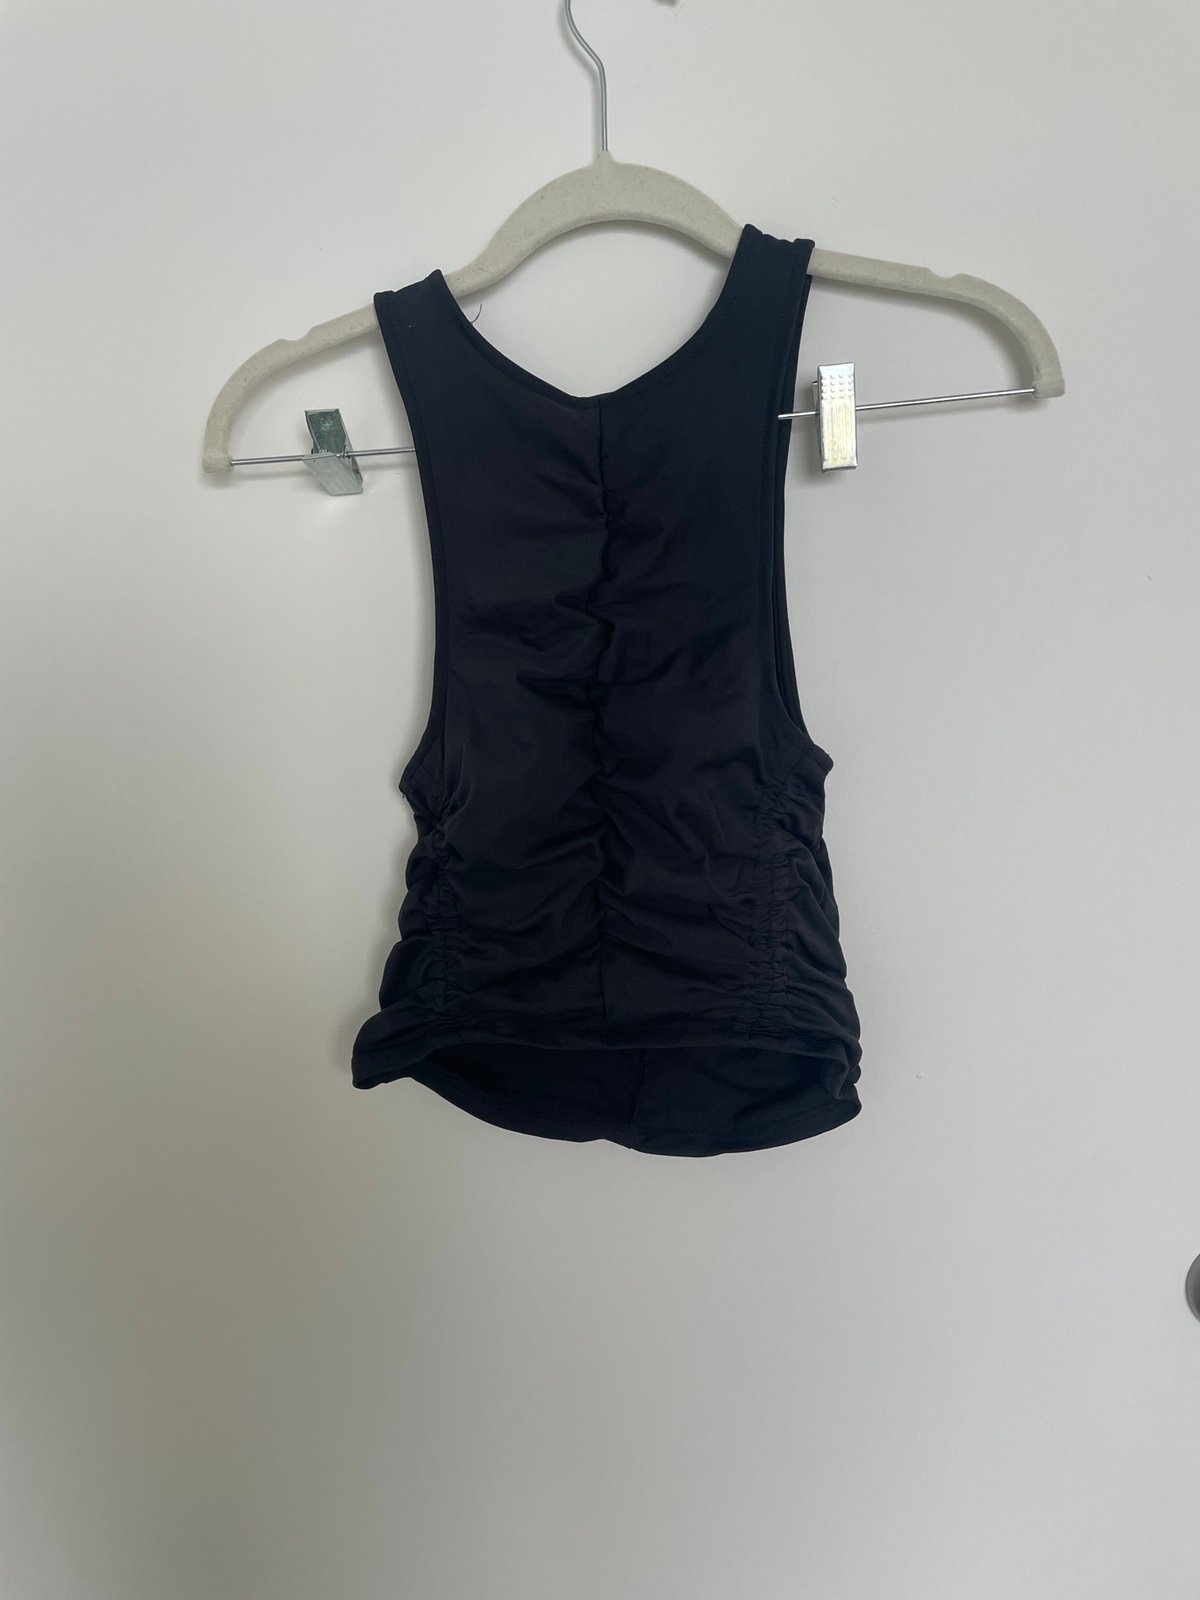 Fashion Black crop tank top O8fnqYxsT Factory Price